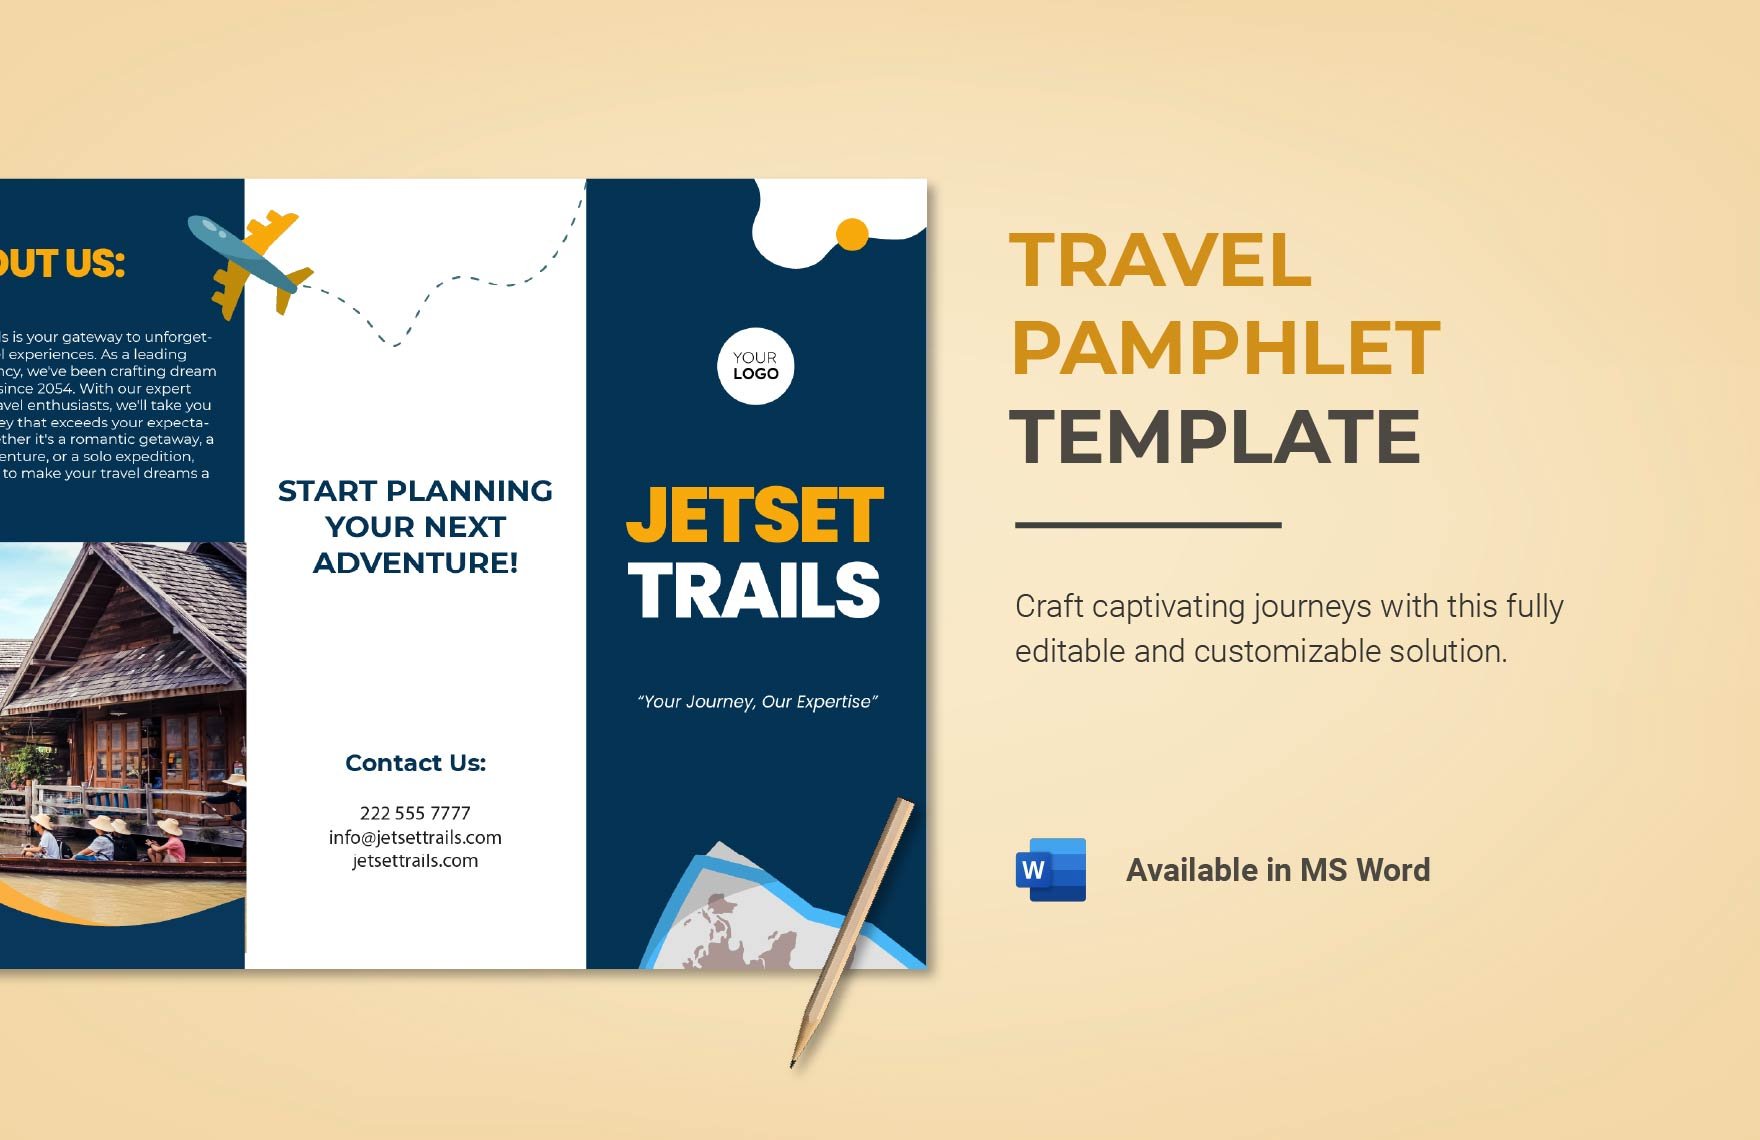 Travel Pamphlet Template